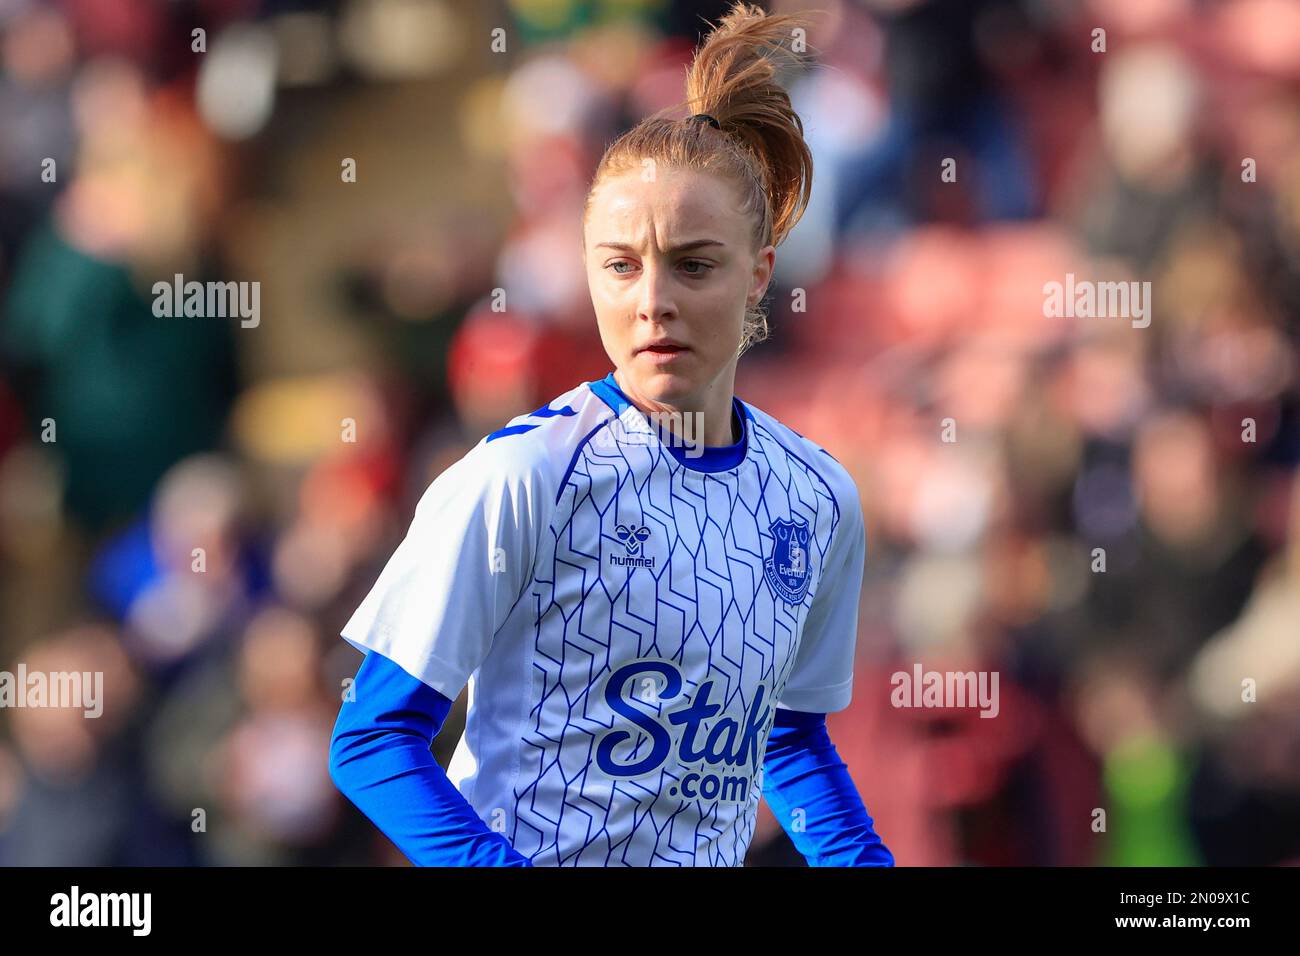 Karen Holmgaard #28 of Everton warms up for the The FA Women's Super League match Manchester United Women vs Everton Women at Leigh Sports Village, Leigh, United Kingdom, 5th February 2023  (Photo by Conor Molloy/News Images) in Leigh, United Kingdom on 2/5/2023. (Photo by Conor Molloy/News Images/Sipa USA) Stock Photo